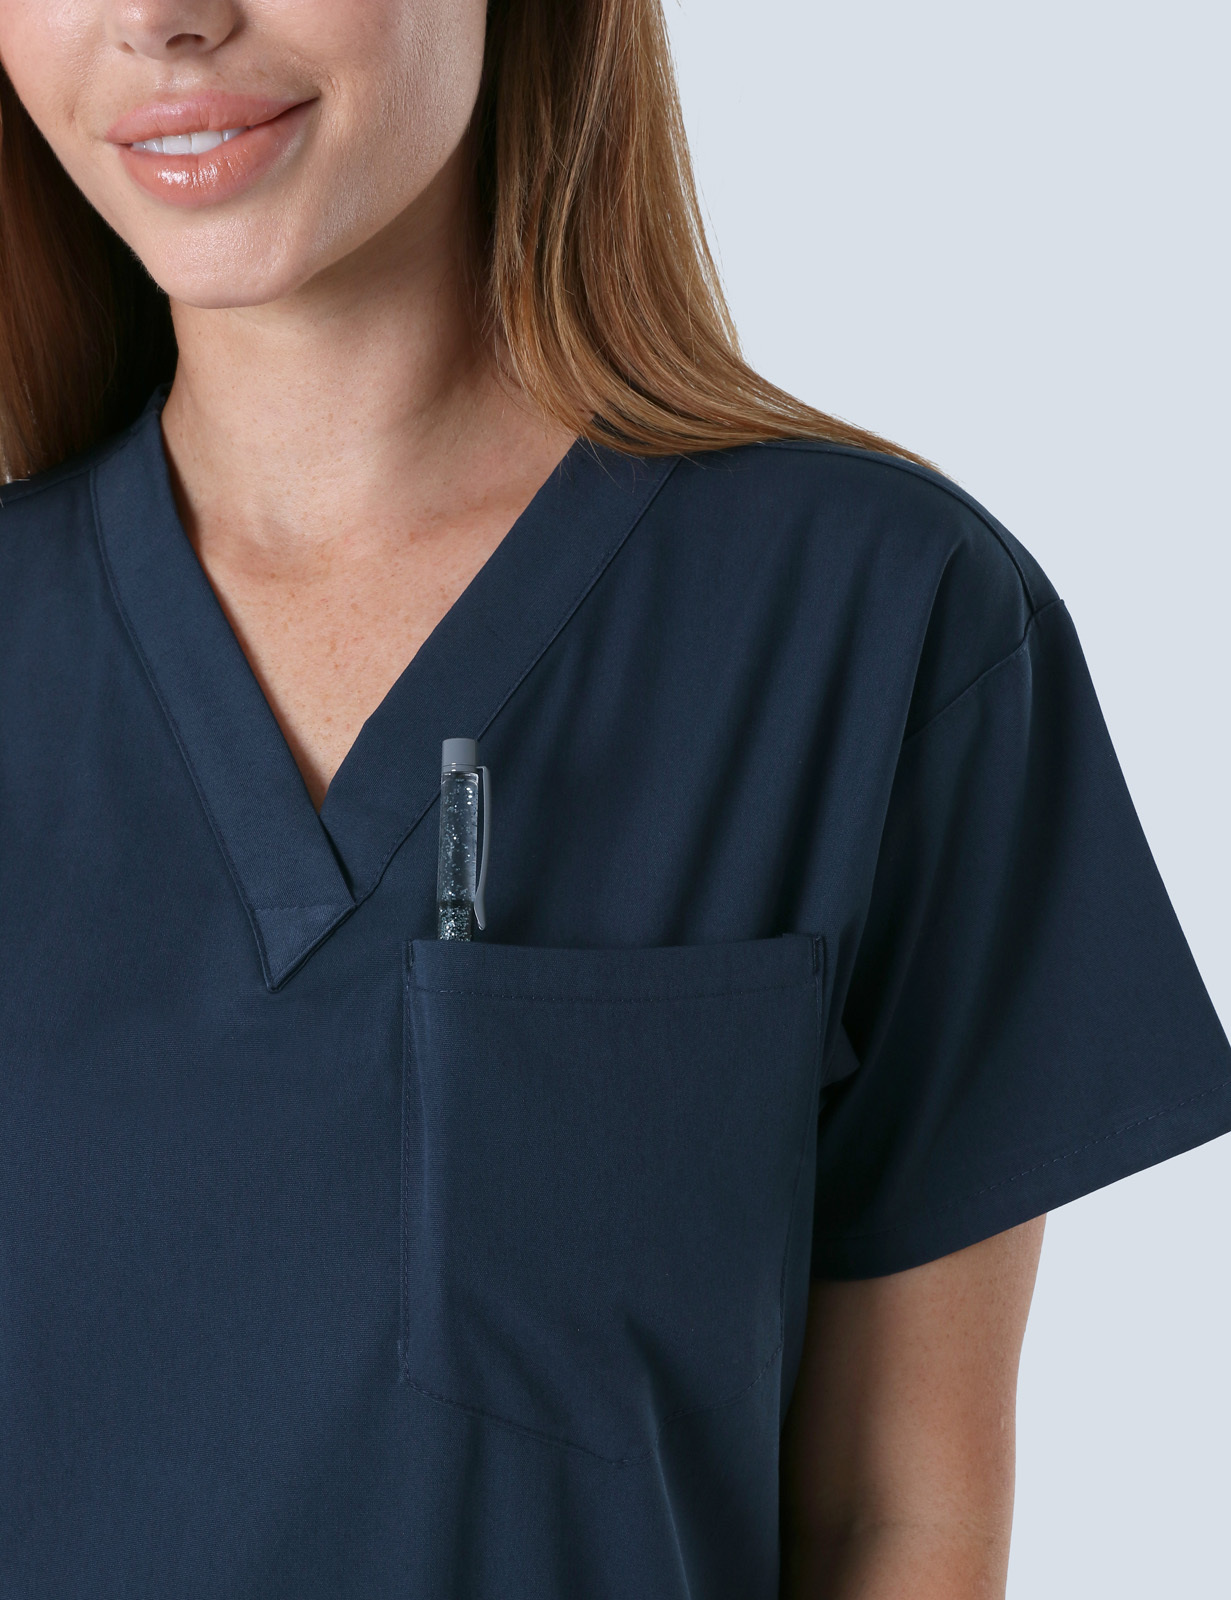 Gladstone Hospital - Medical Surgical (4 Pocket Scrub Top and Cargo Pants in Navy incl Logos)